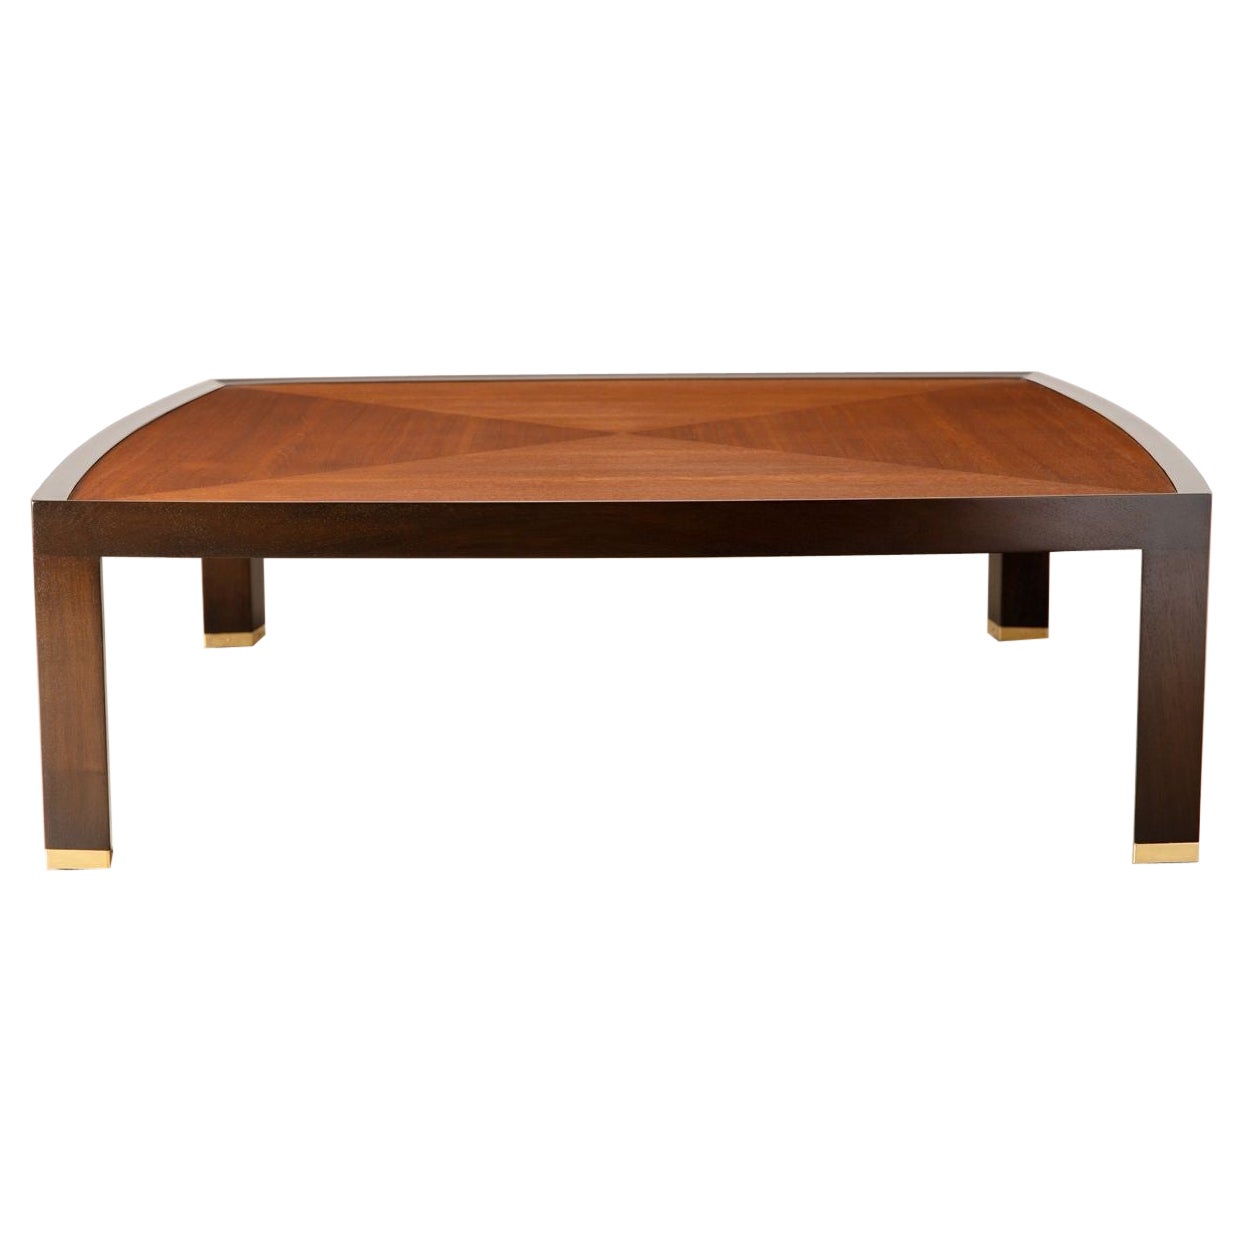 Edward Wormley for Dunbar Large Scale Square Coffee Table in Mahogany for Dunbar For Sale